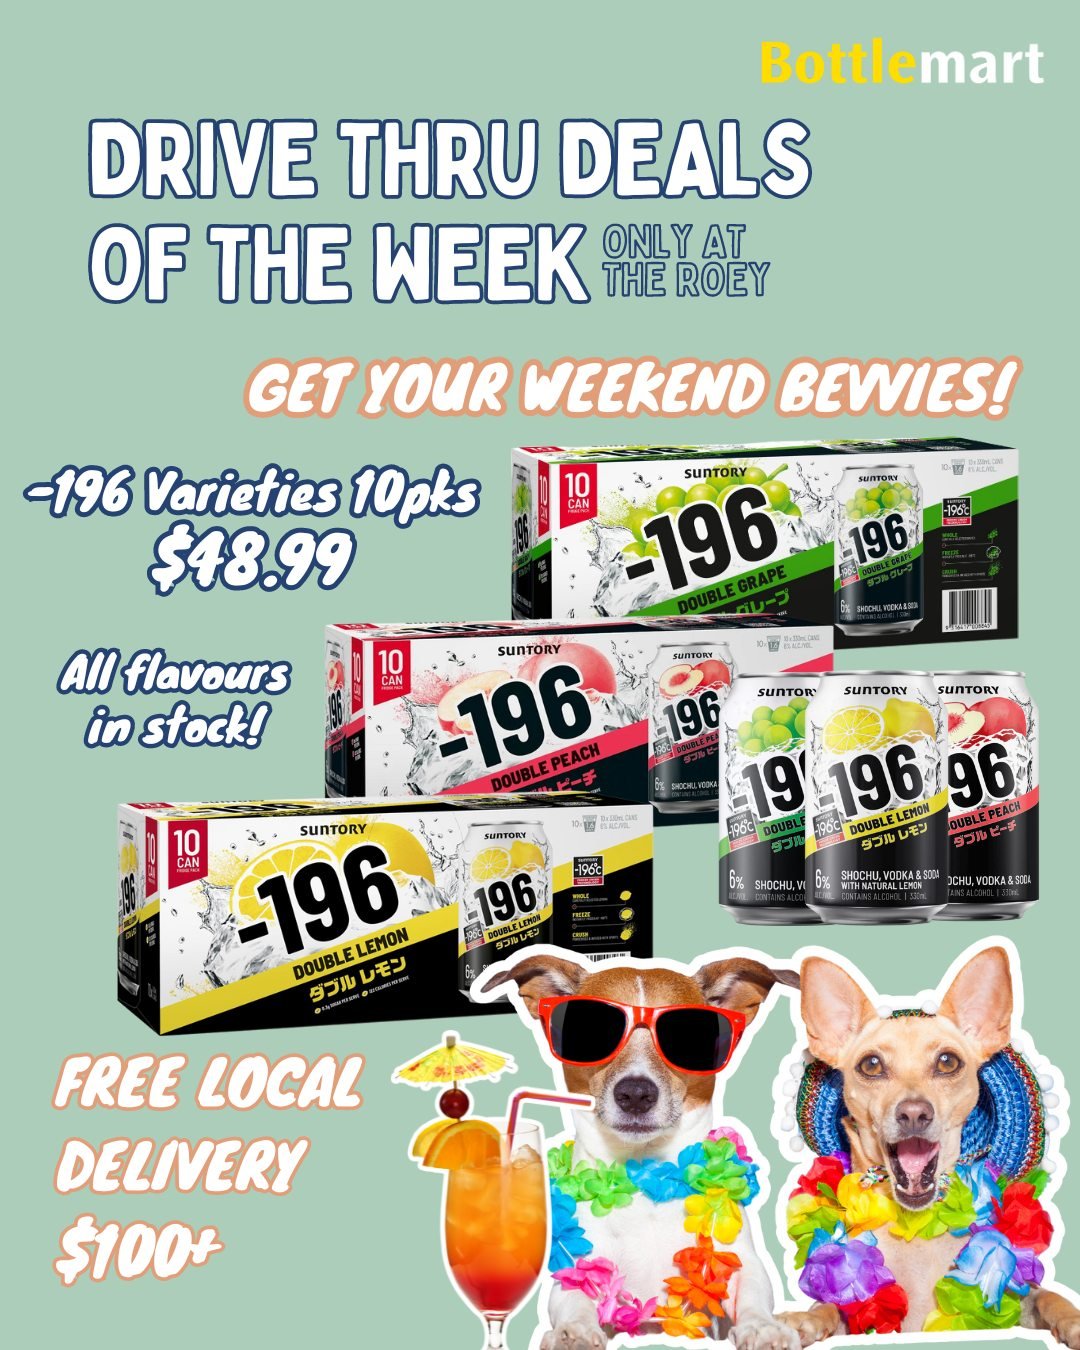 Check out our Drive Thru Deals of the week 👇🏽😆

👉🏽 196 Double Lemon, Grape or Peach 10pks $48.99
👉🏽 Hard Rated 4pks $22.99
👉🏽 Great Northern 3.5% 24Btls $53.99
👉🏽 Skyy Vodka 700ml $44.99
👉🏽 Fireball, Jim Beam, Canadian Club or Sailor Jer